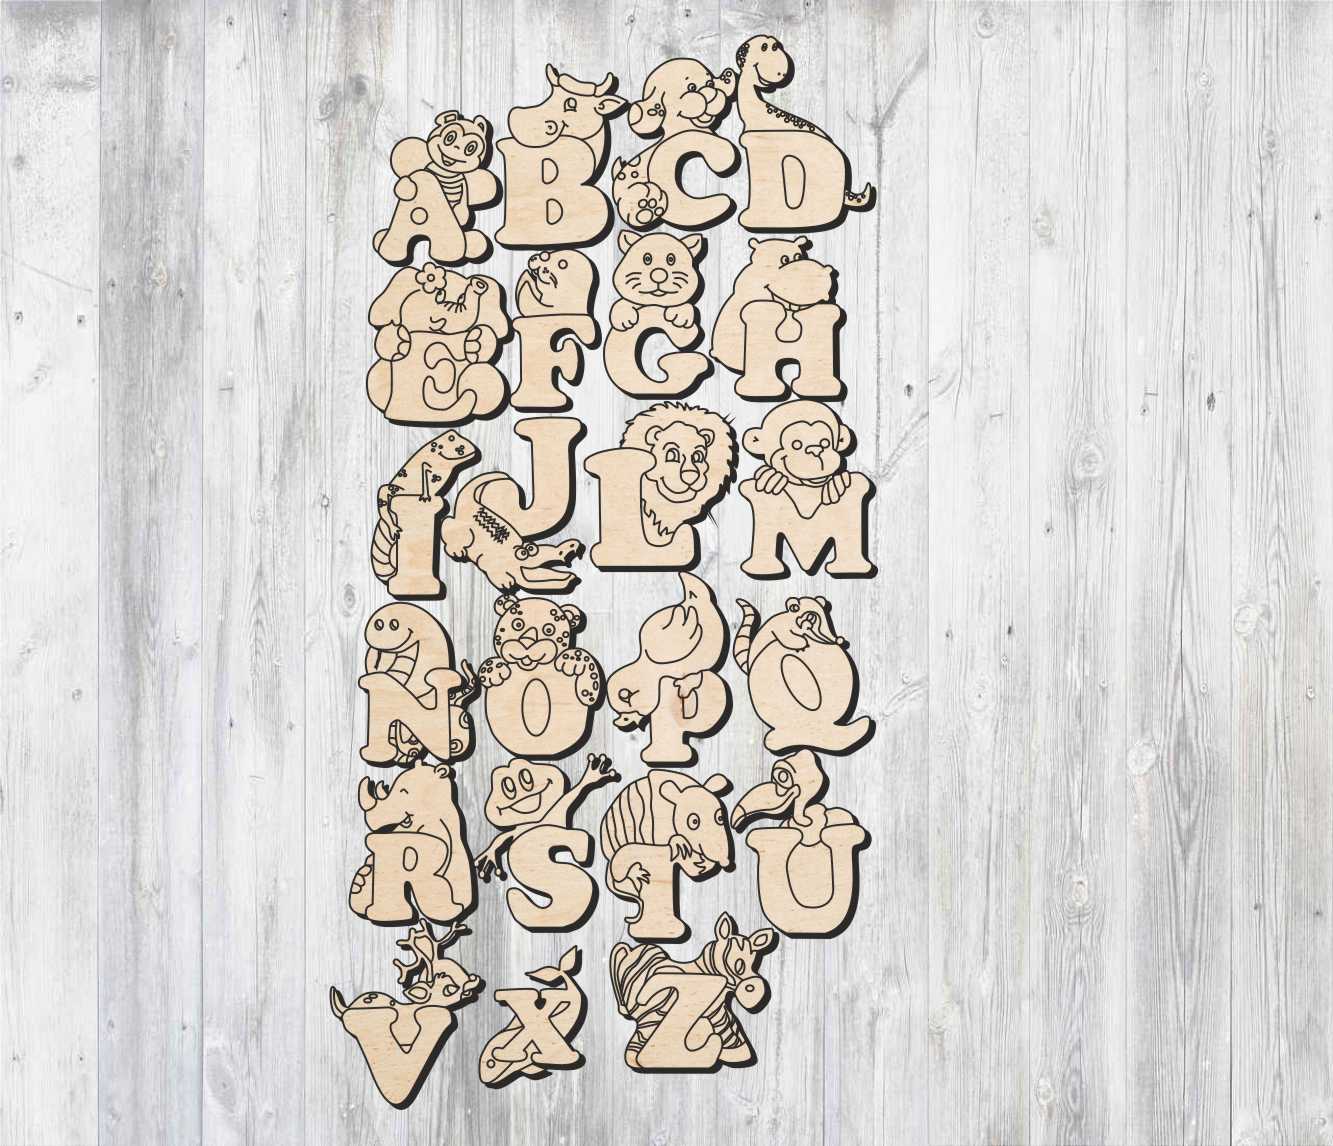 Letters A-Z Monogram Digital Vector Download Laser Cnc Cut svg dxf pdf eps cdr files wall sticker engraving decal silhouette template router